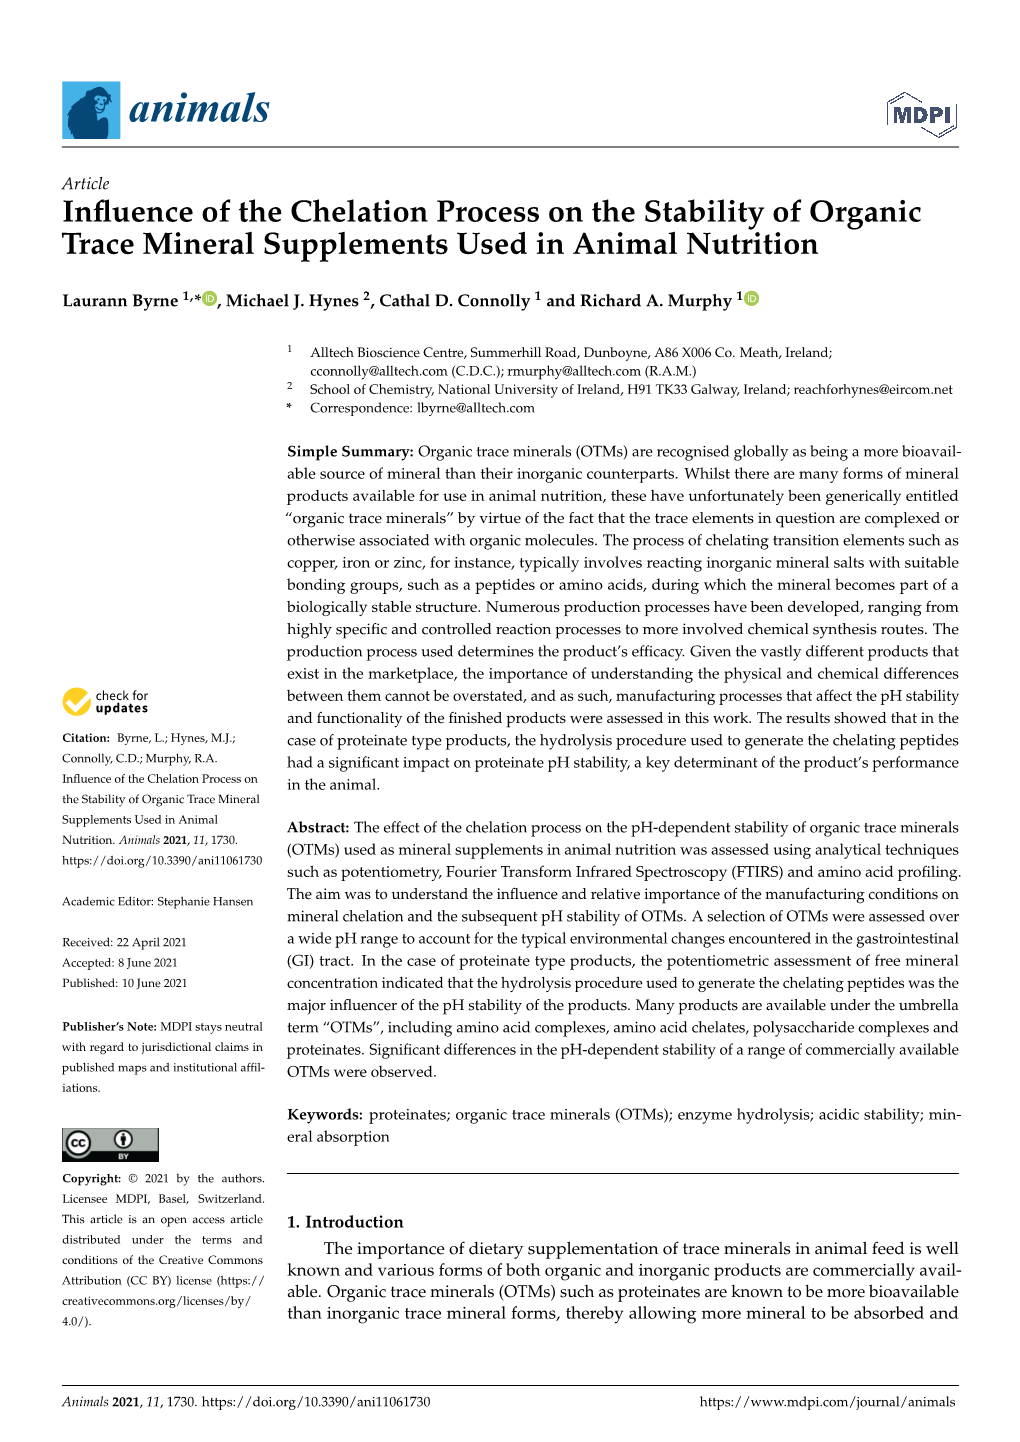 Influence of the Chelation Process on the Stability of Organic Trace Mineral Supplements Used in Animal Nutrition